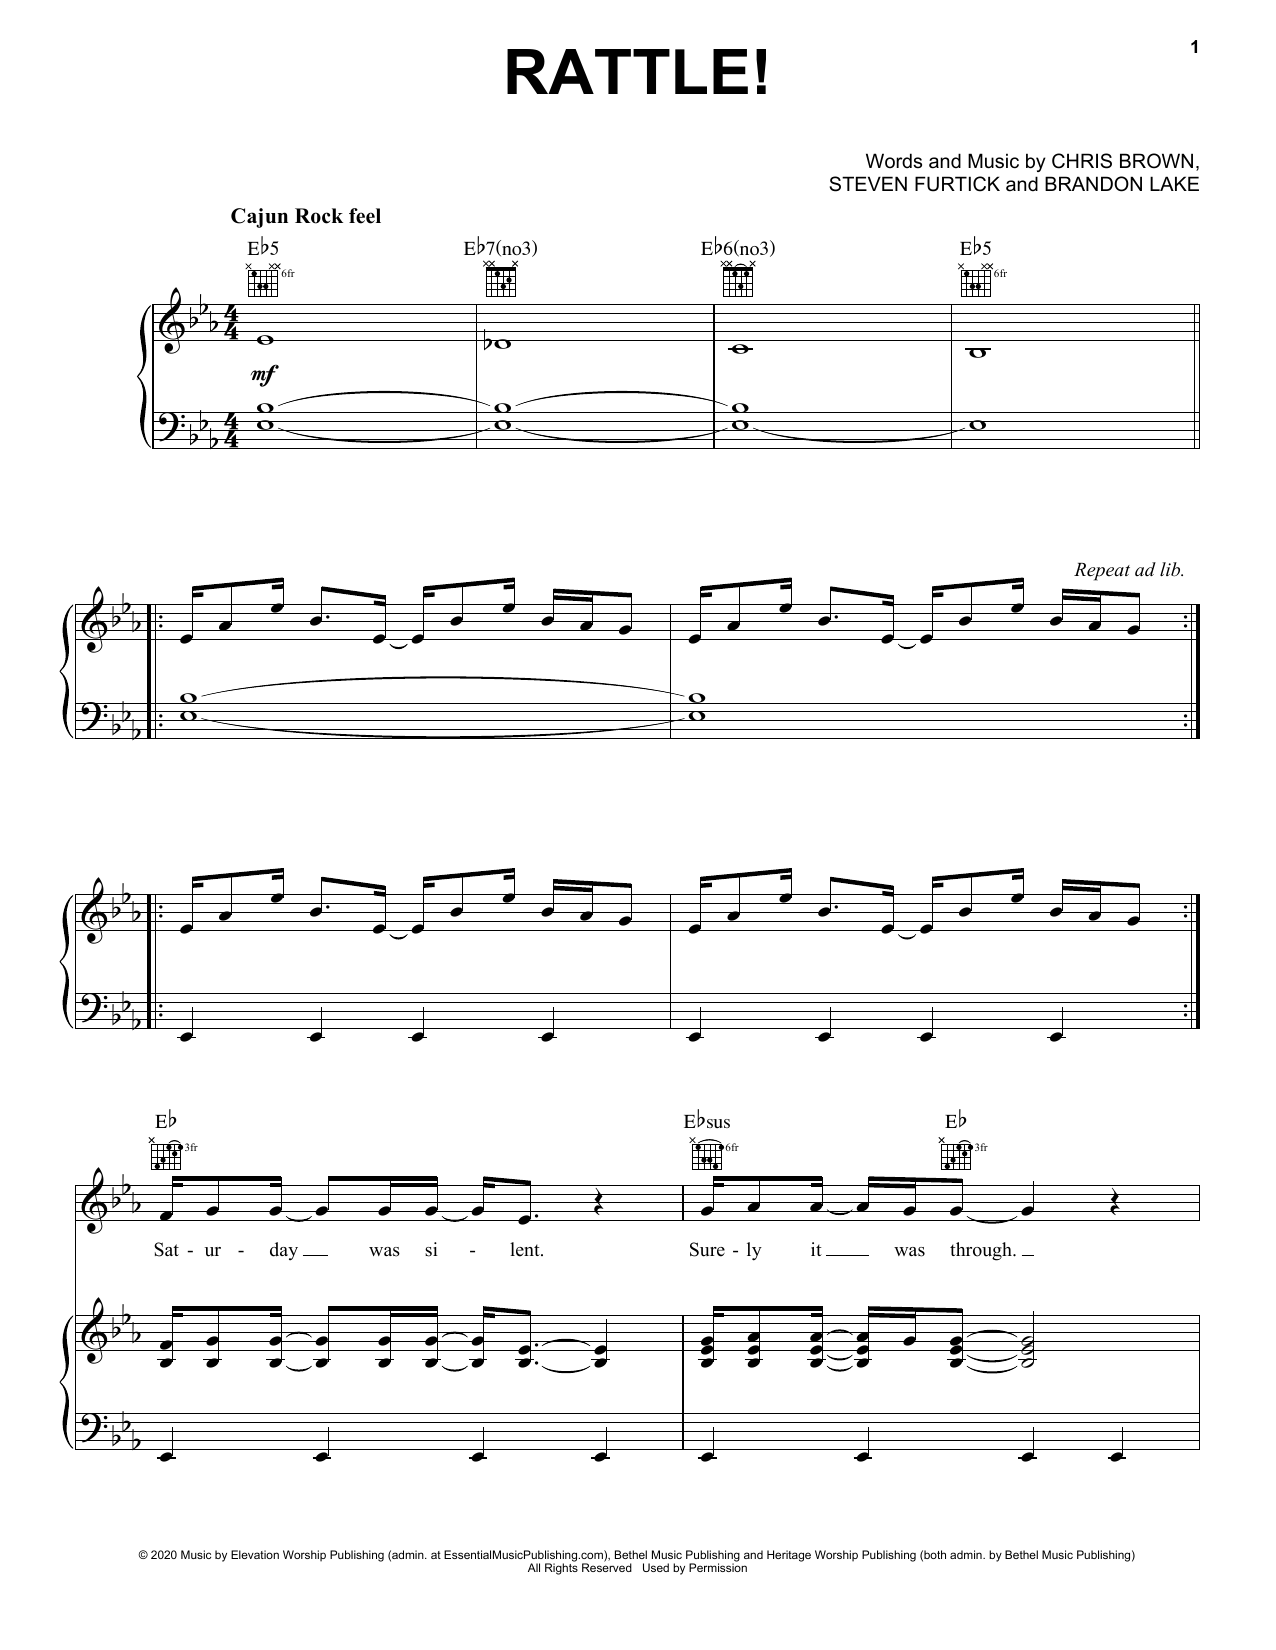 Elevation Worship RATTLE! sheet music notes and chords. Download Printable PDF.